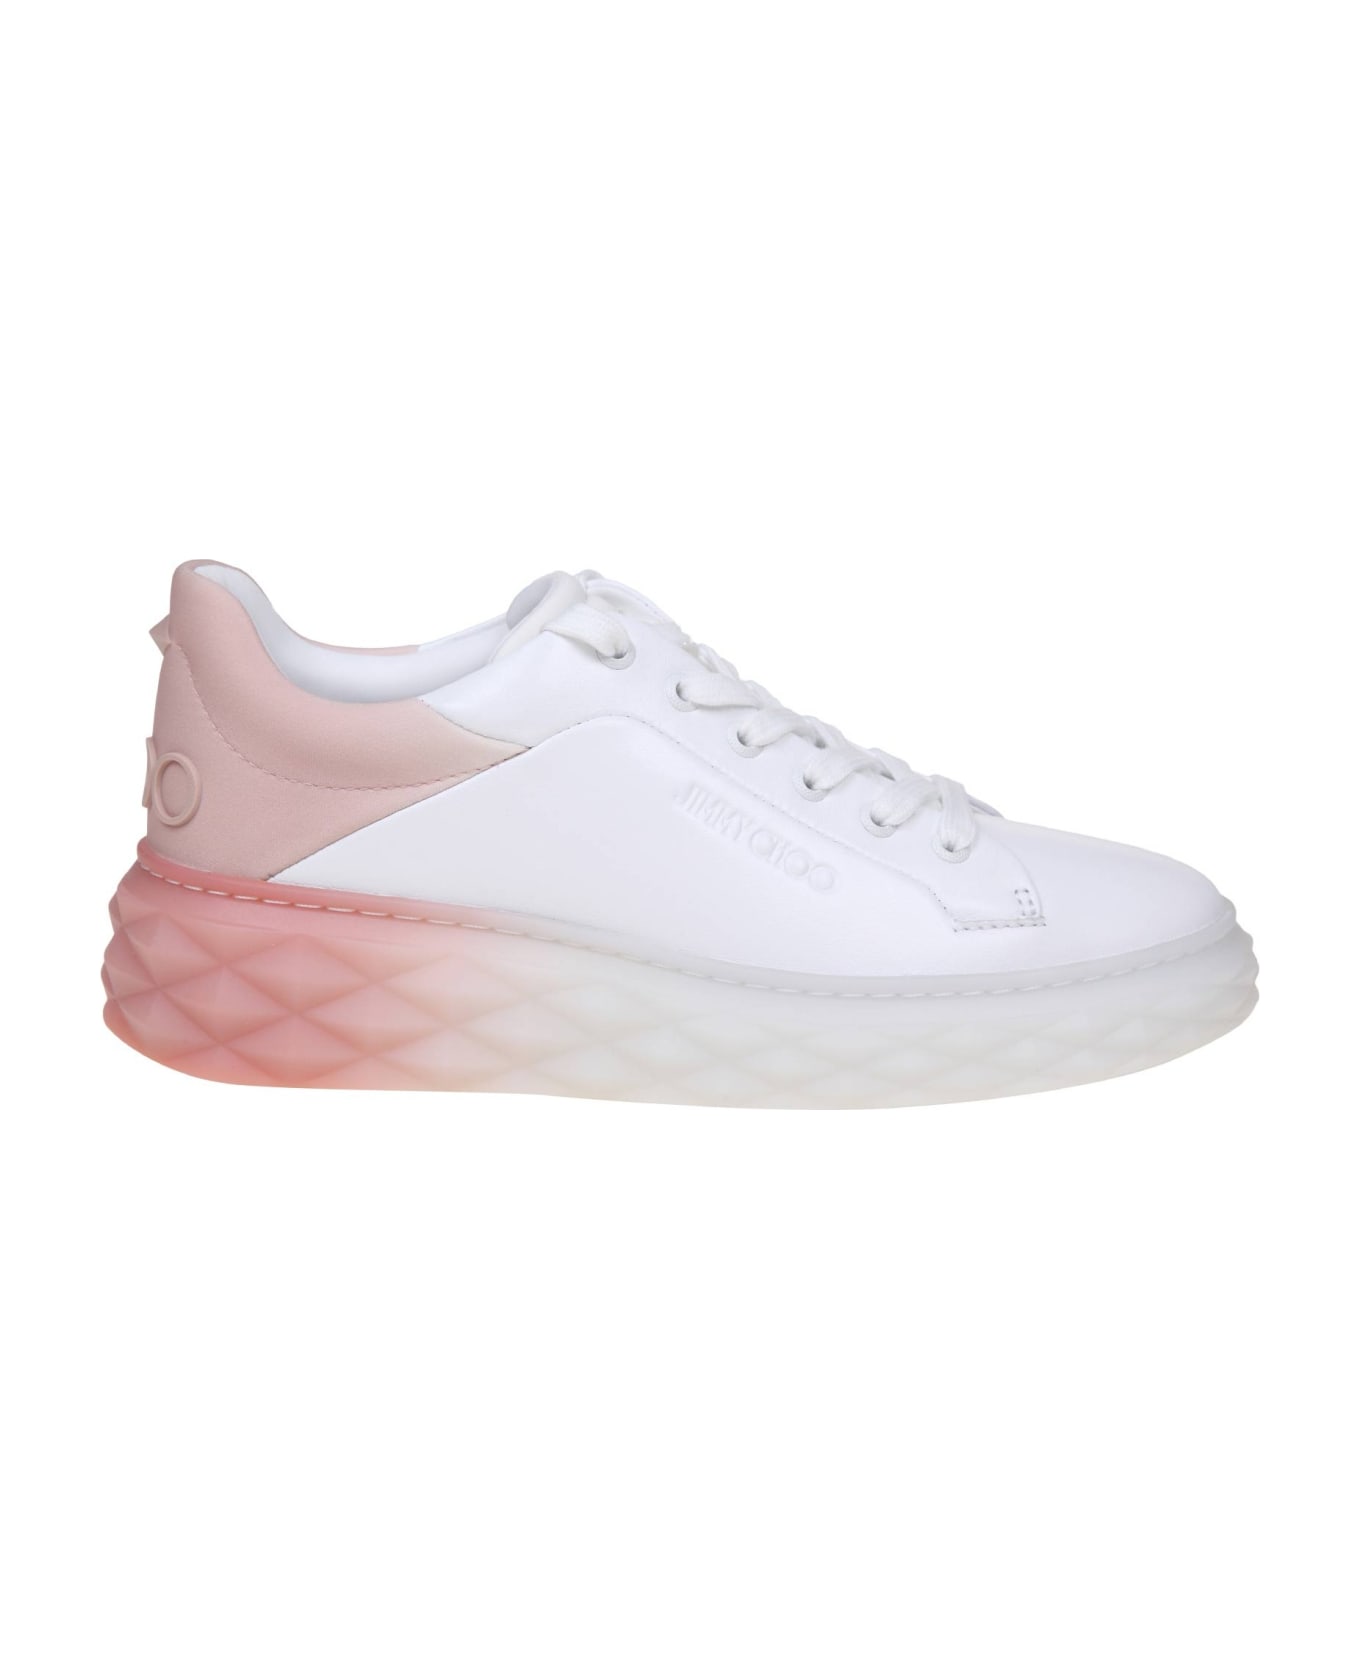 Jimmy Choo Diamond Maxi Sneakers In White And Pink Leather - White Black Mix